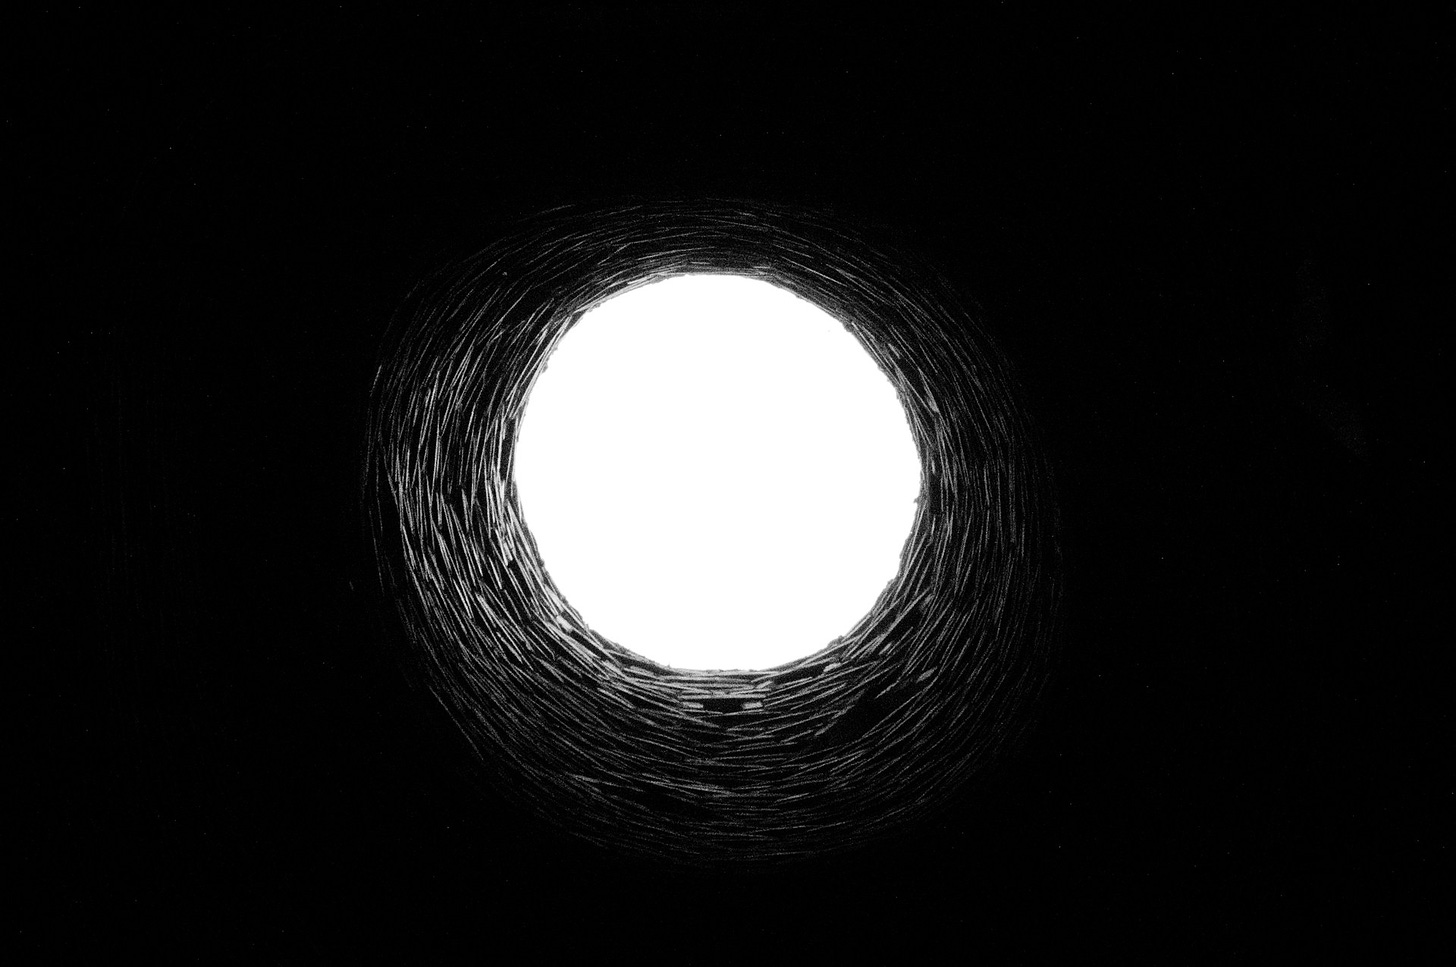 Looking up to the sky through a deep tunnel